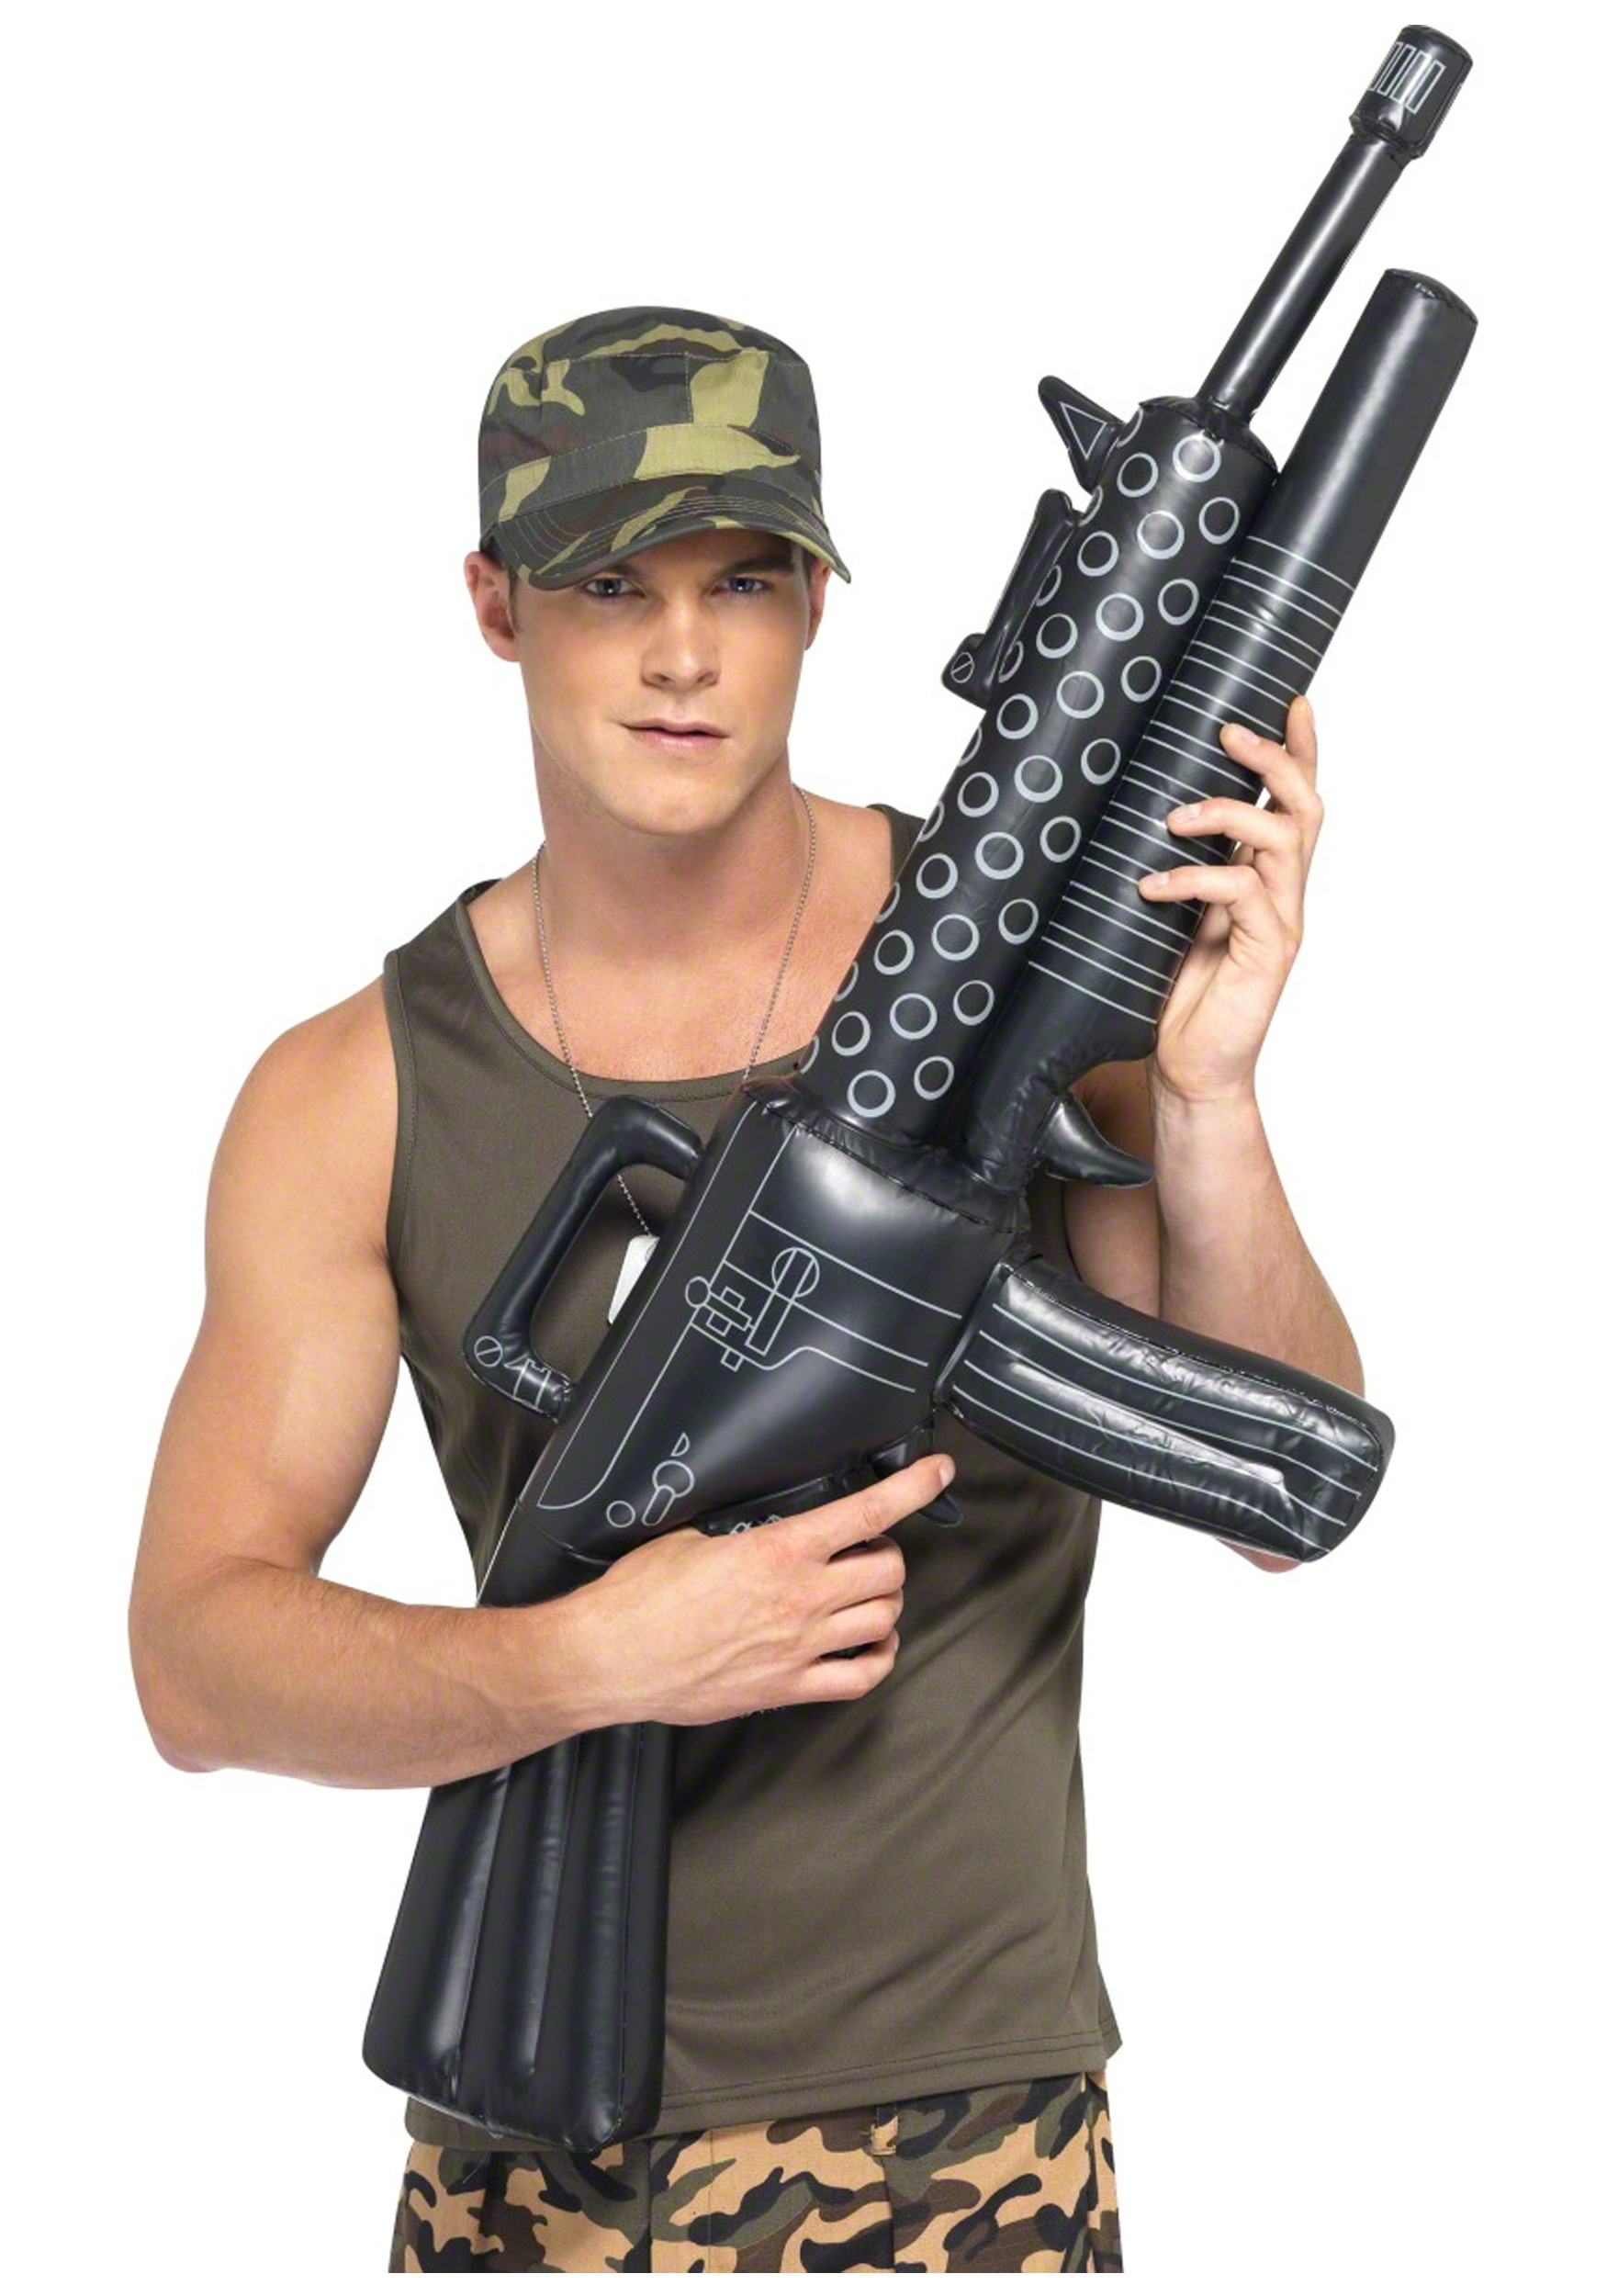 Inflatable Gangster Gun - Fake Weapons, Halloween Costume Ideas